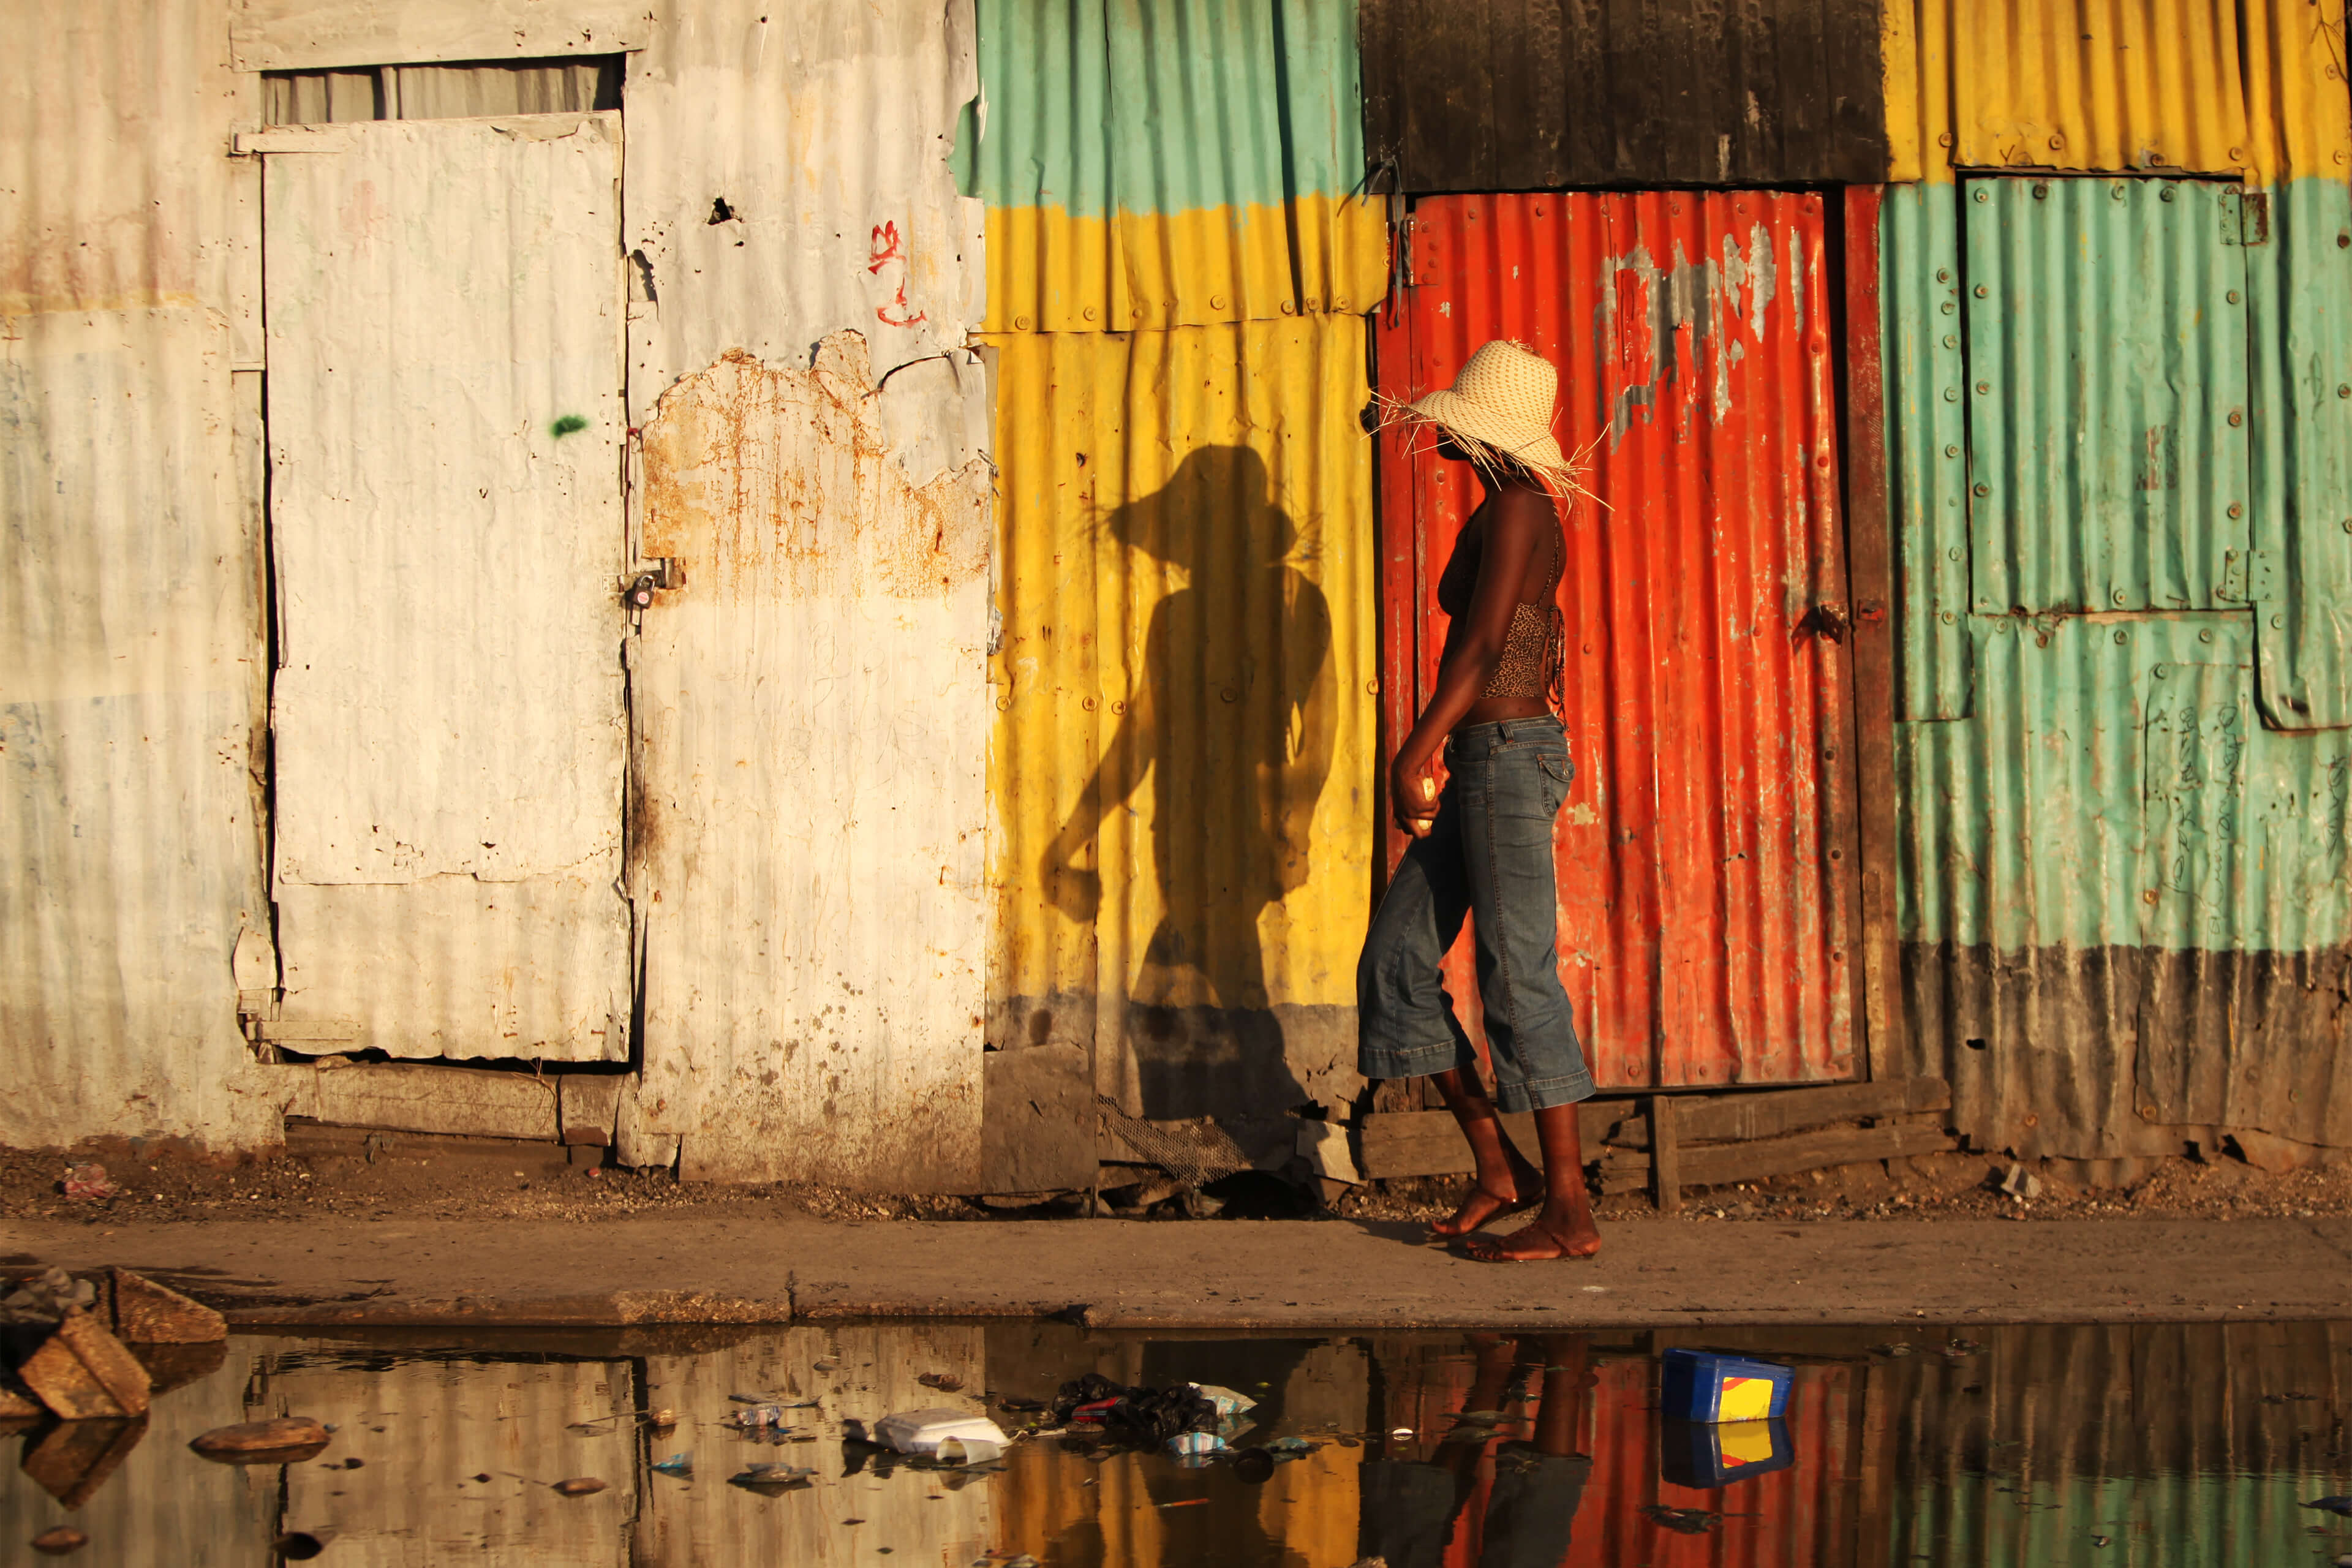 A Haitian woman with a straw hat walks past a rusty corrugated iron wall.